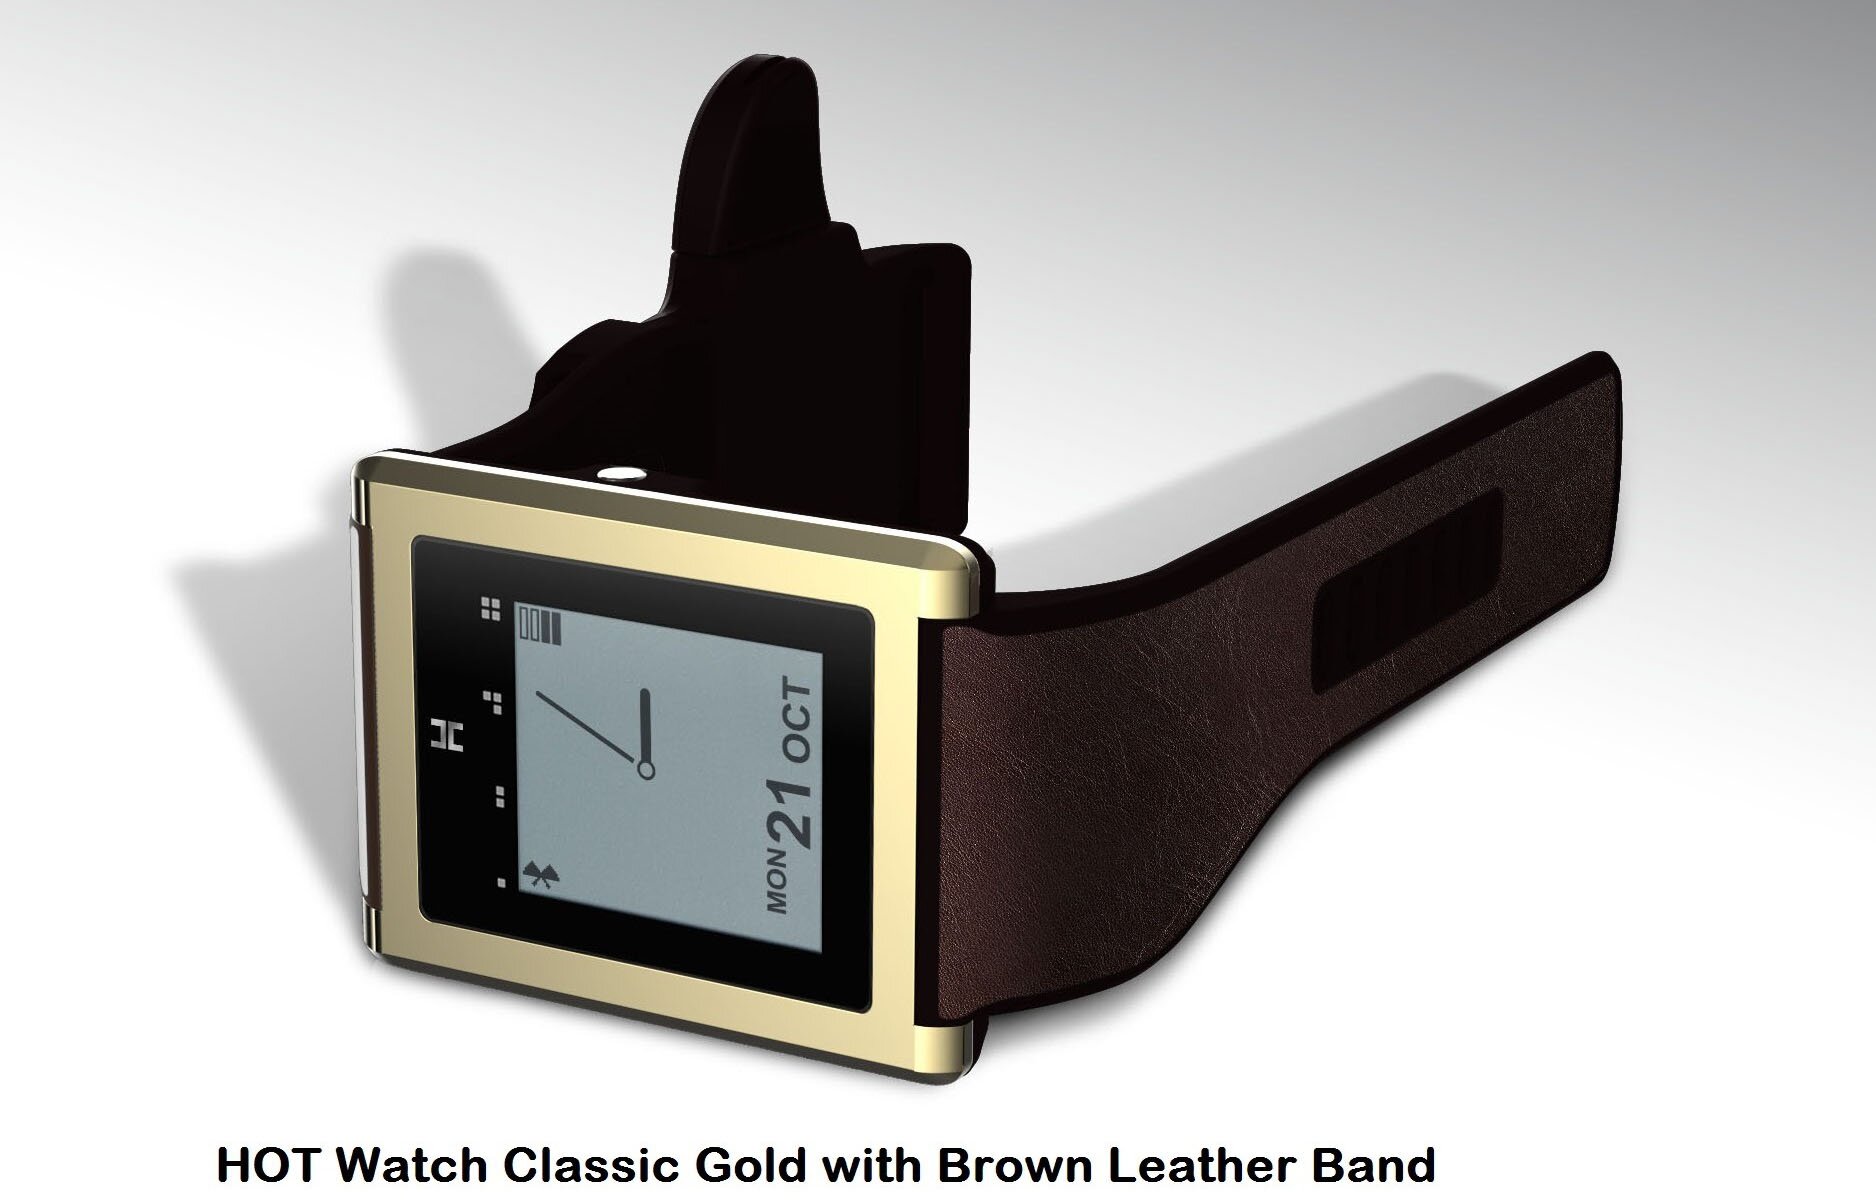 HOT Smart Watch Classic Gold with Brown Leather Band